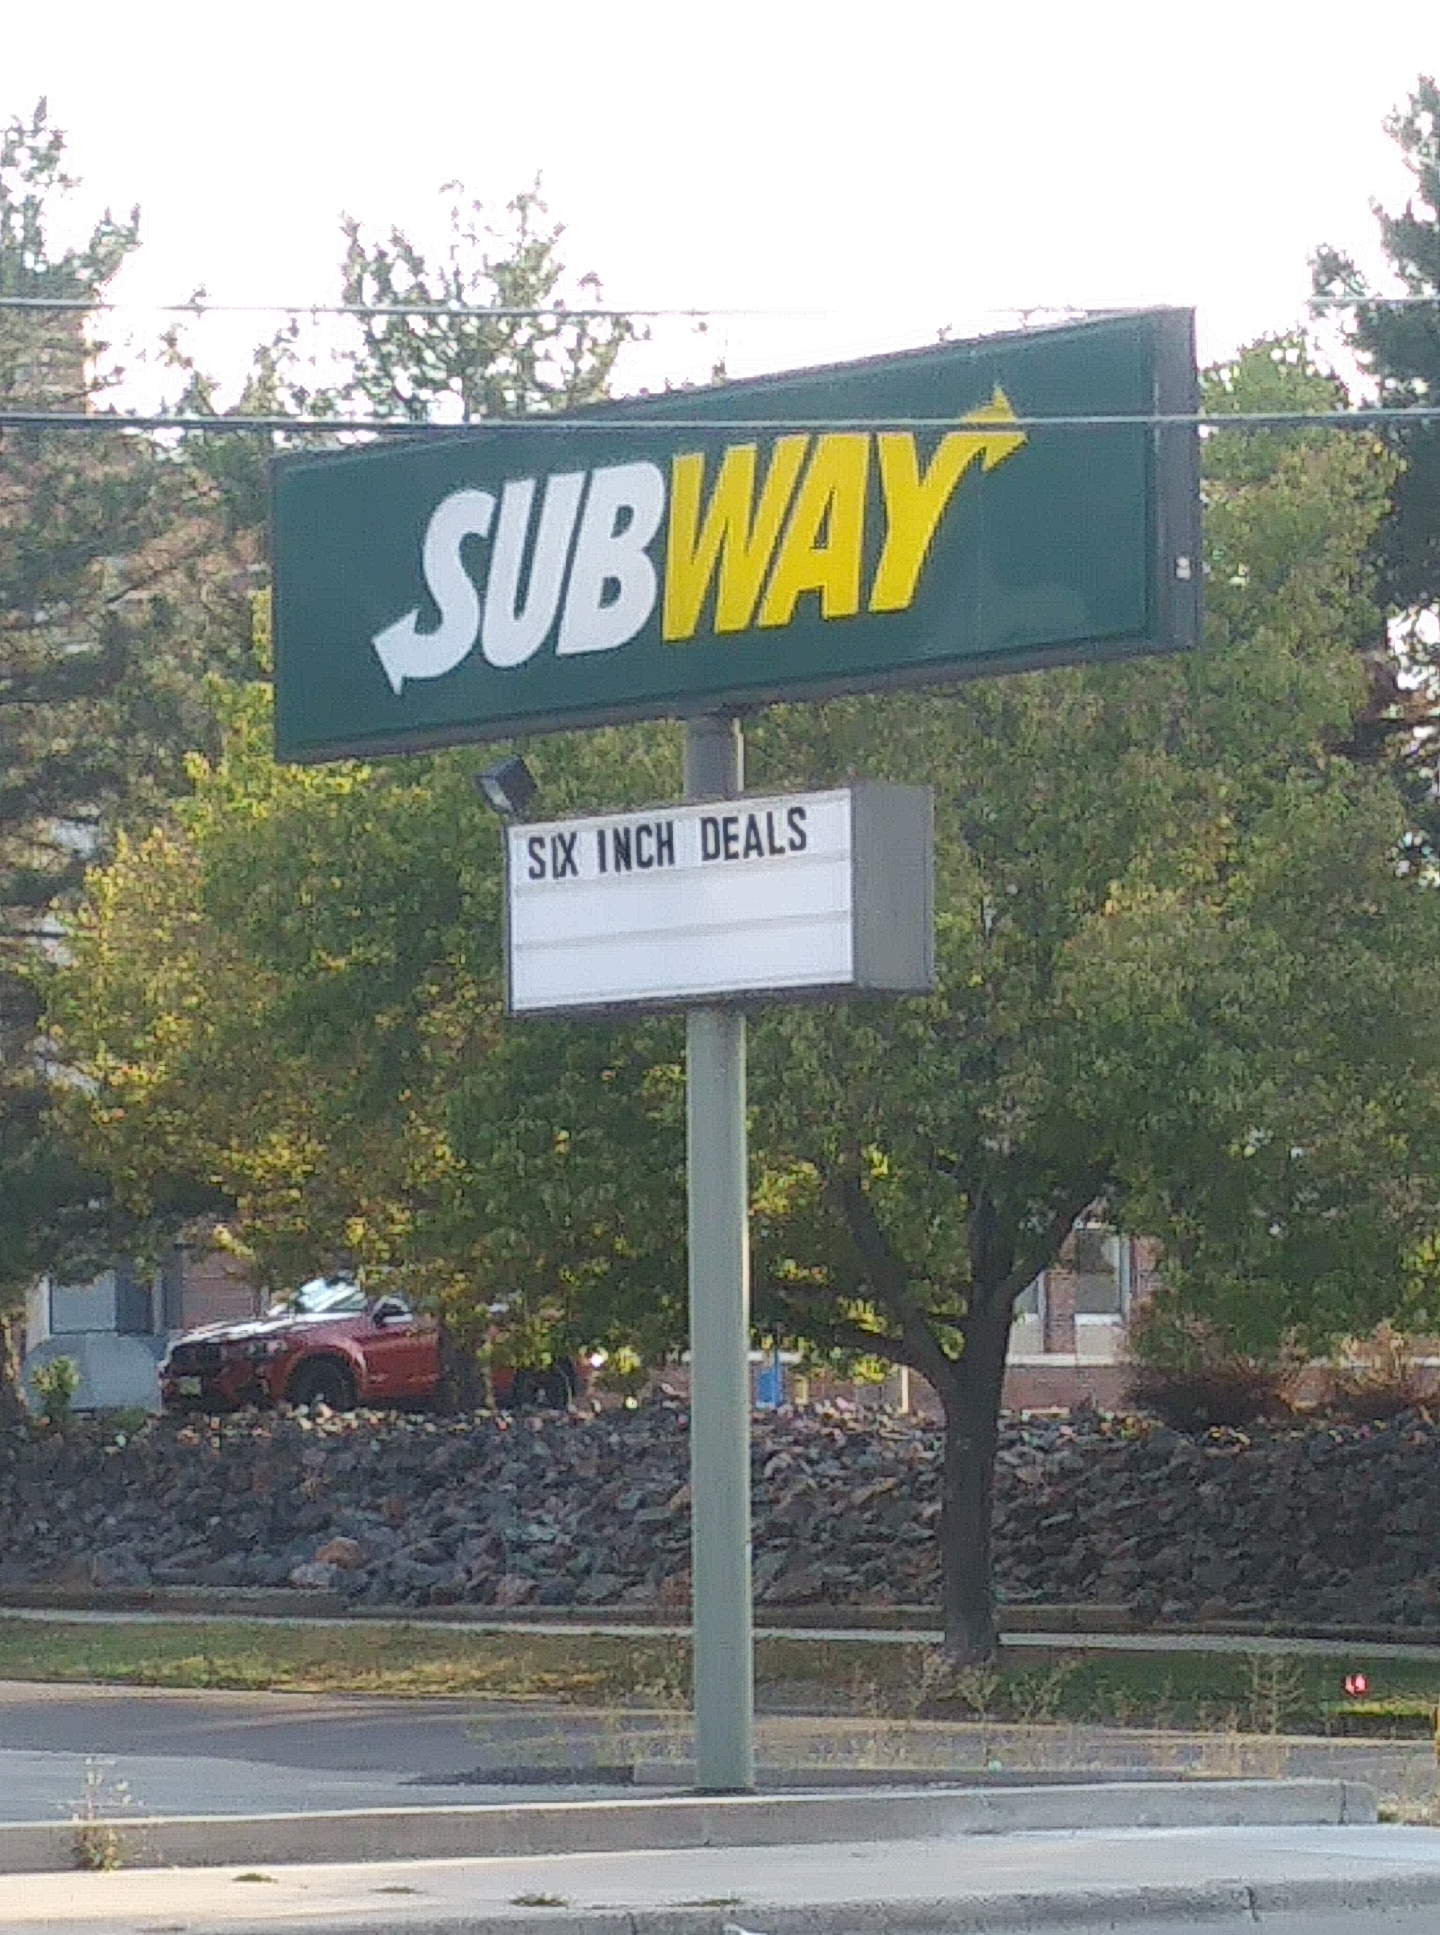 High Quality Subway six inch deal Blank Meme Template